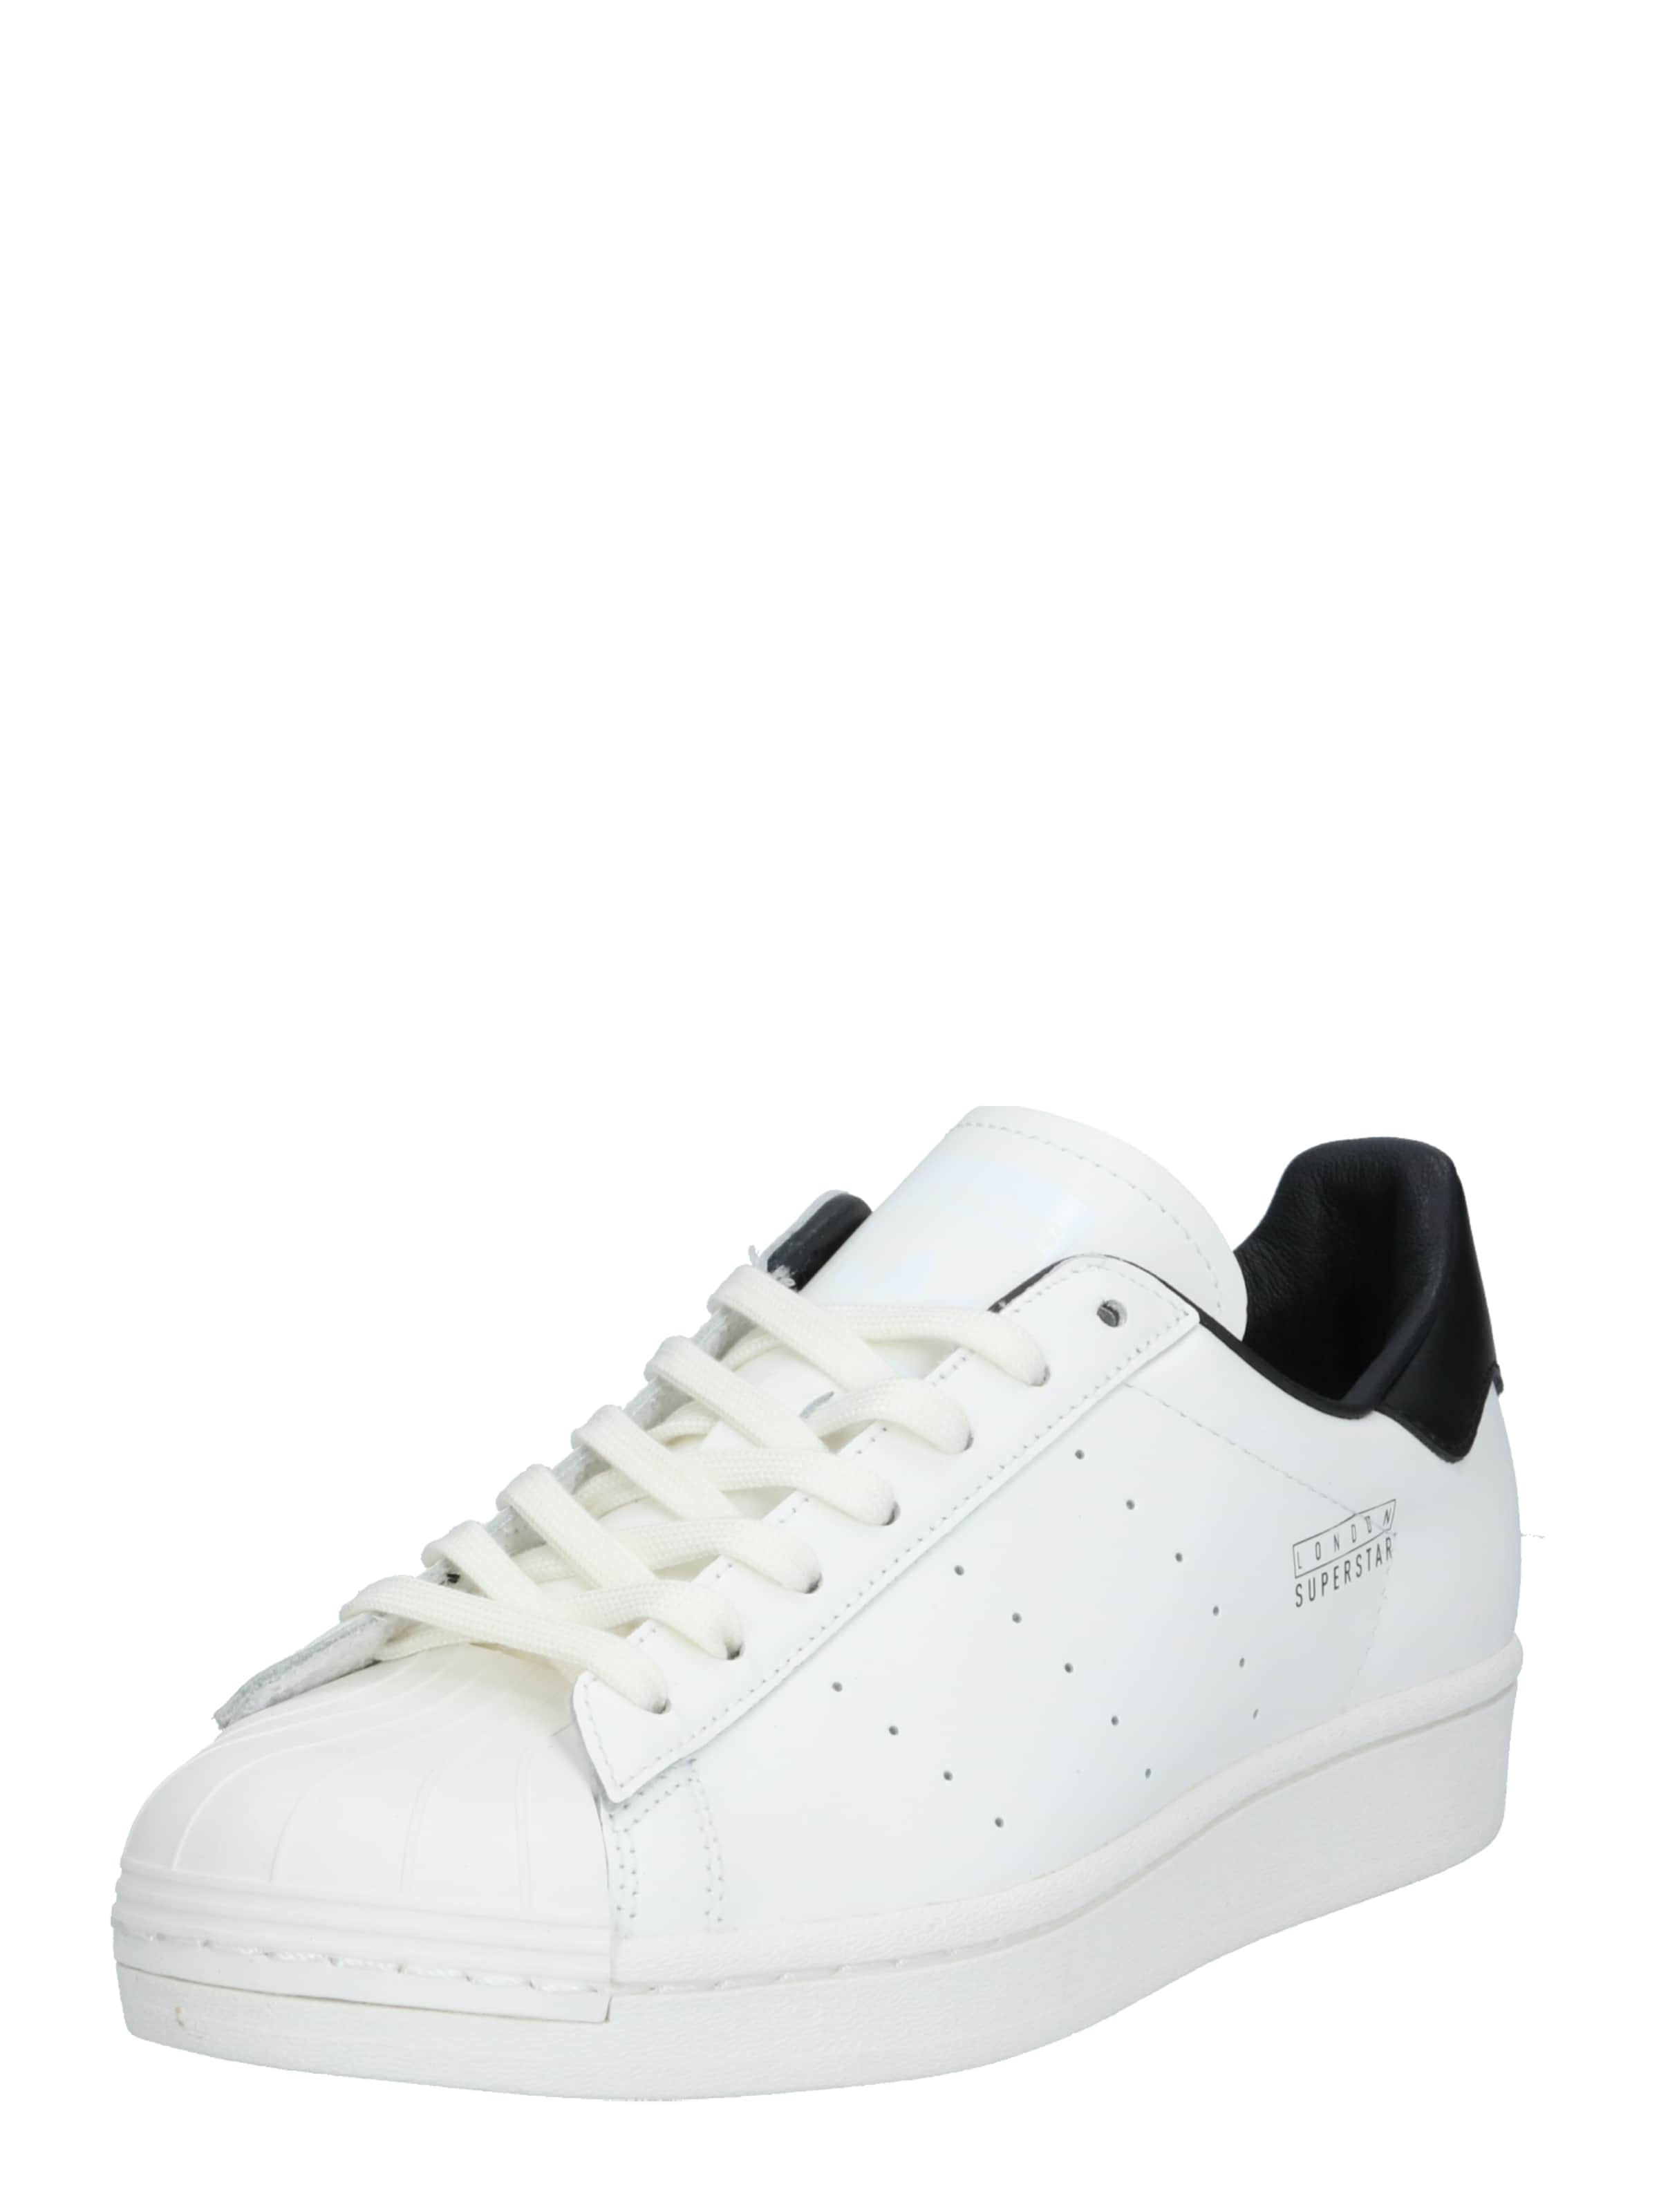 adidas superstar front view